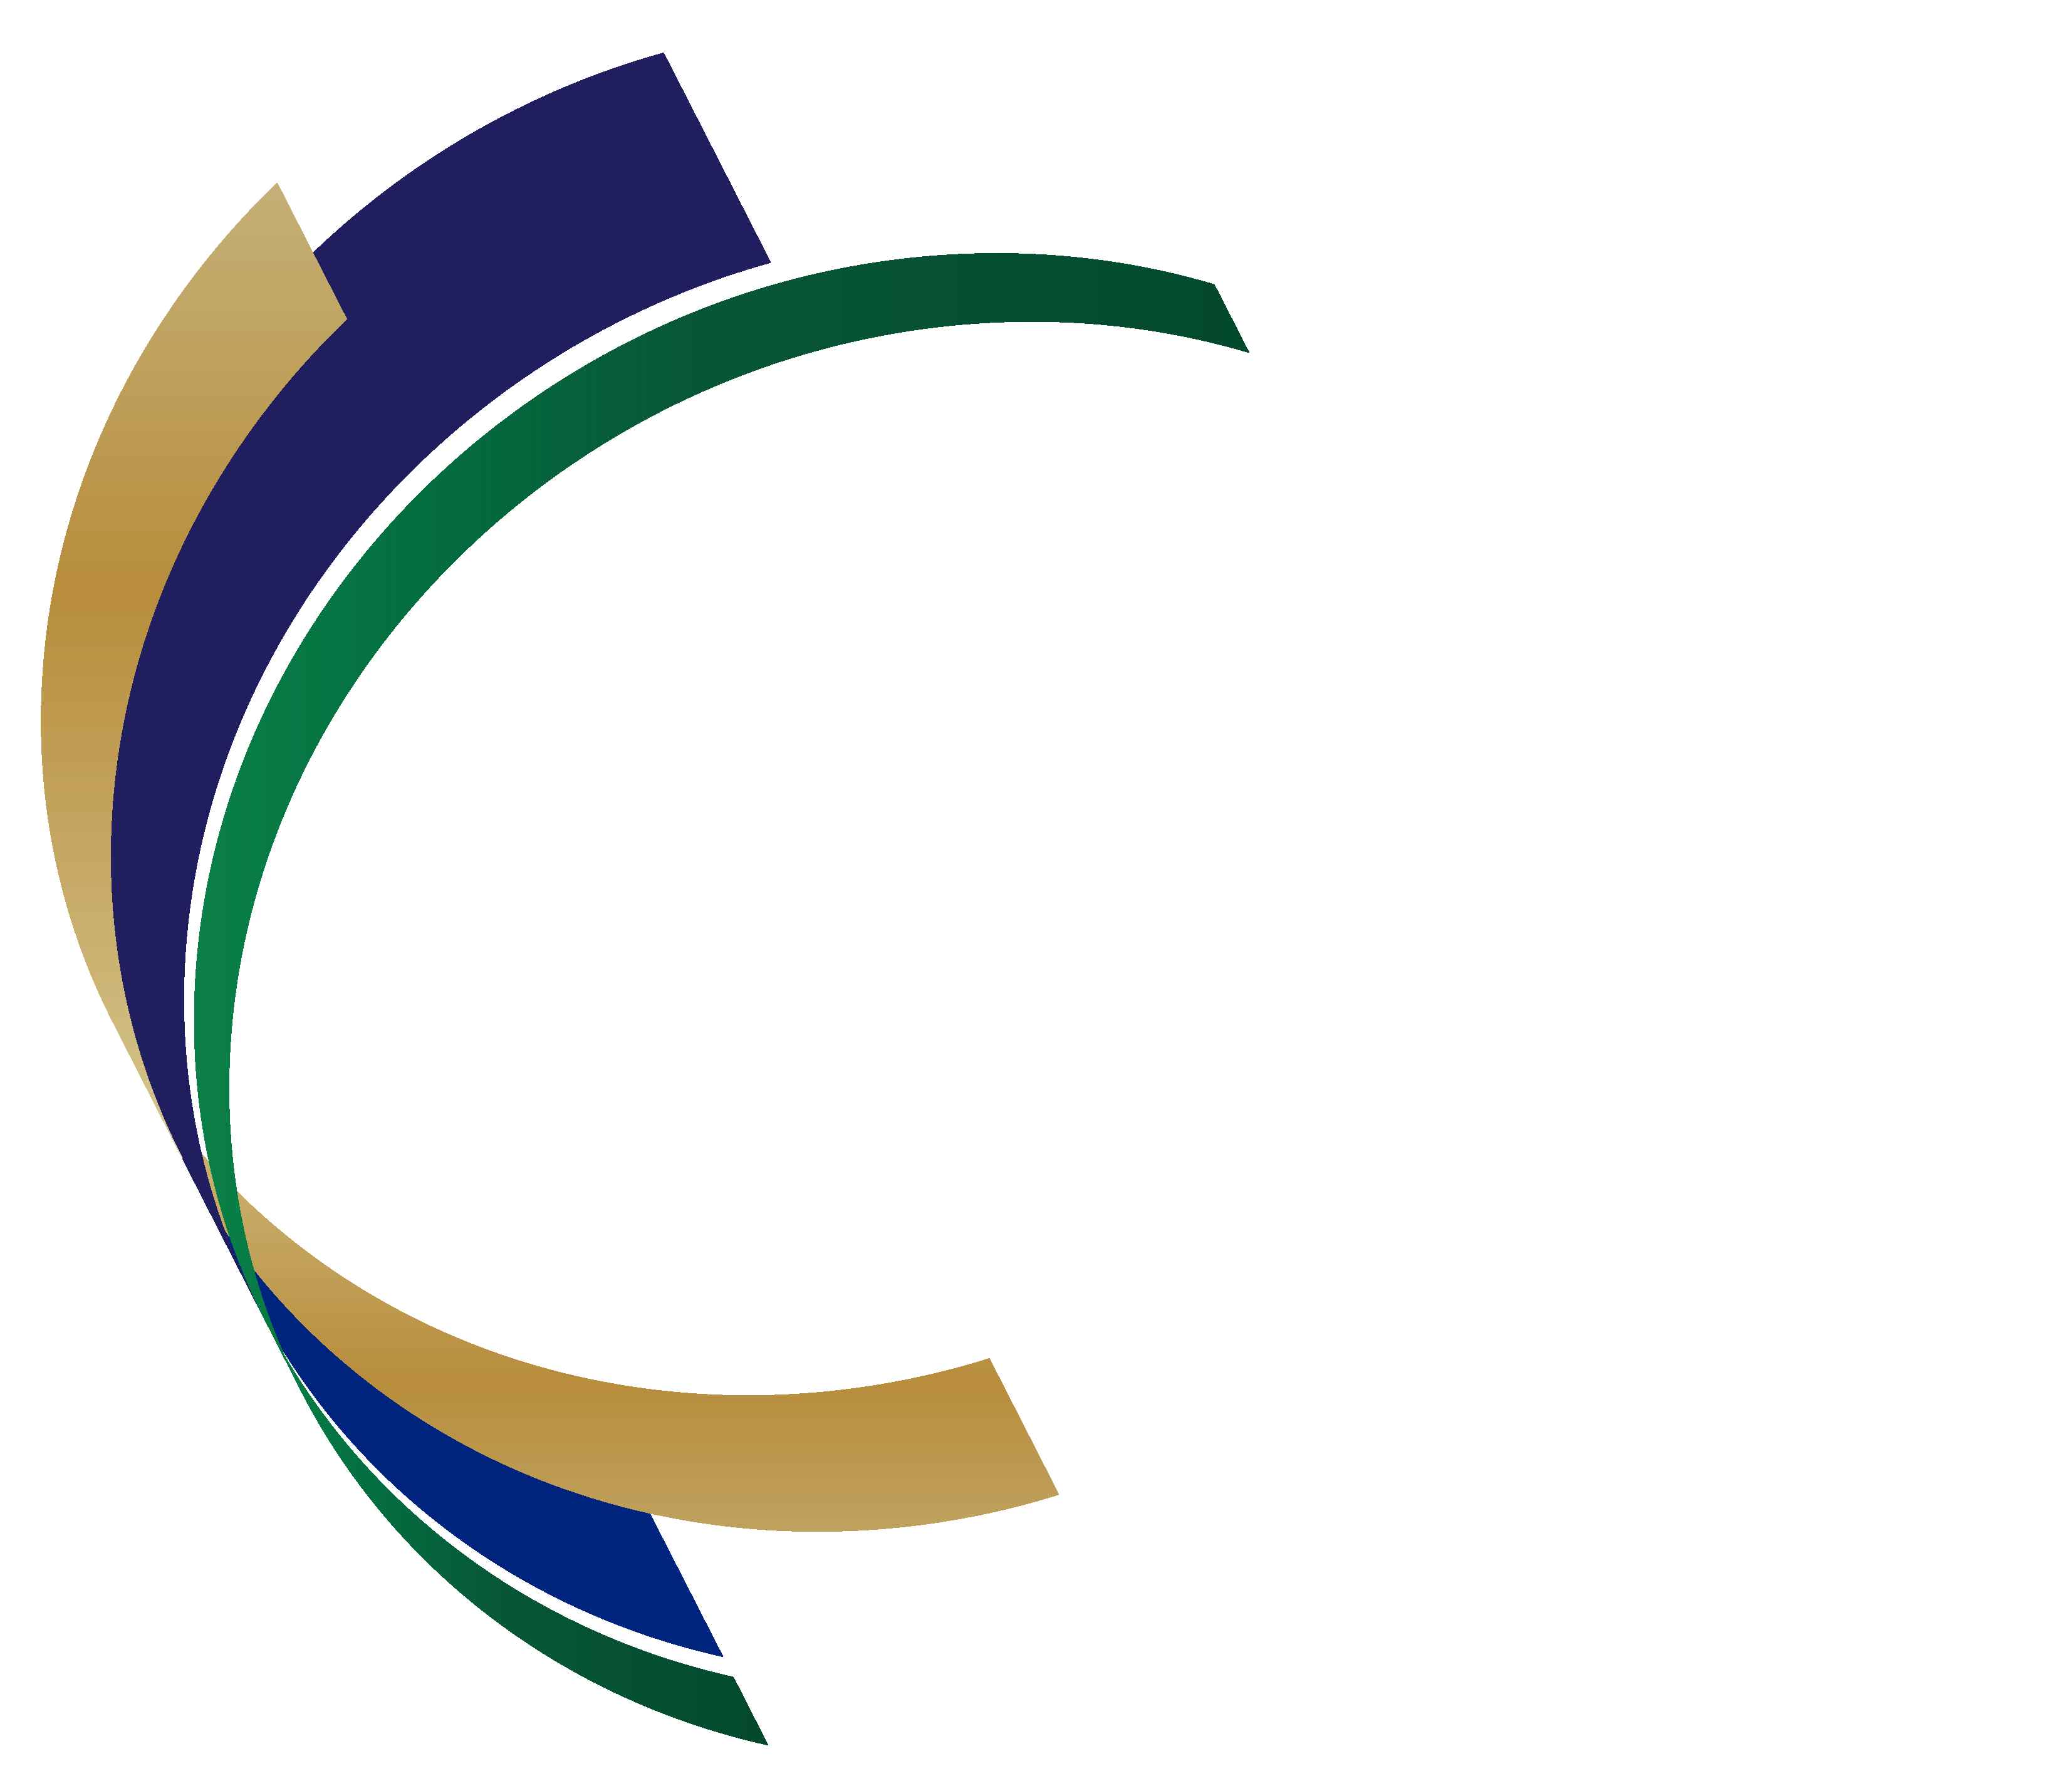 The National Property Awards